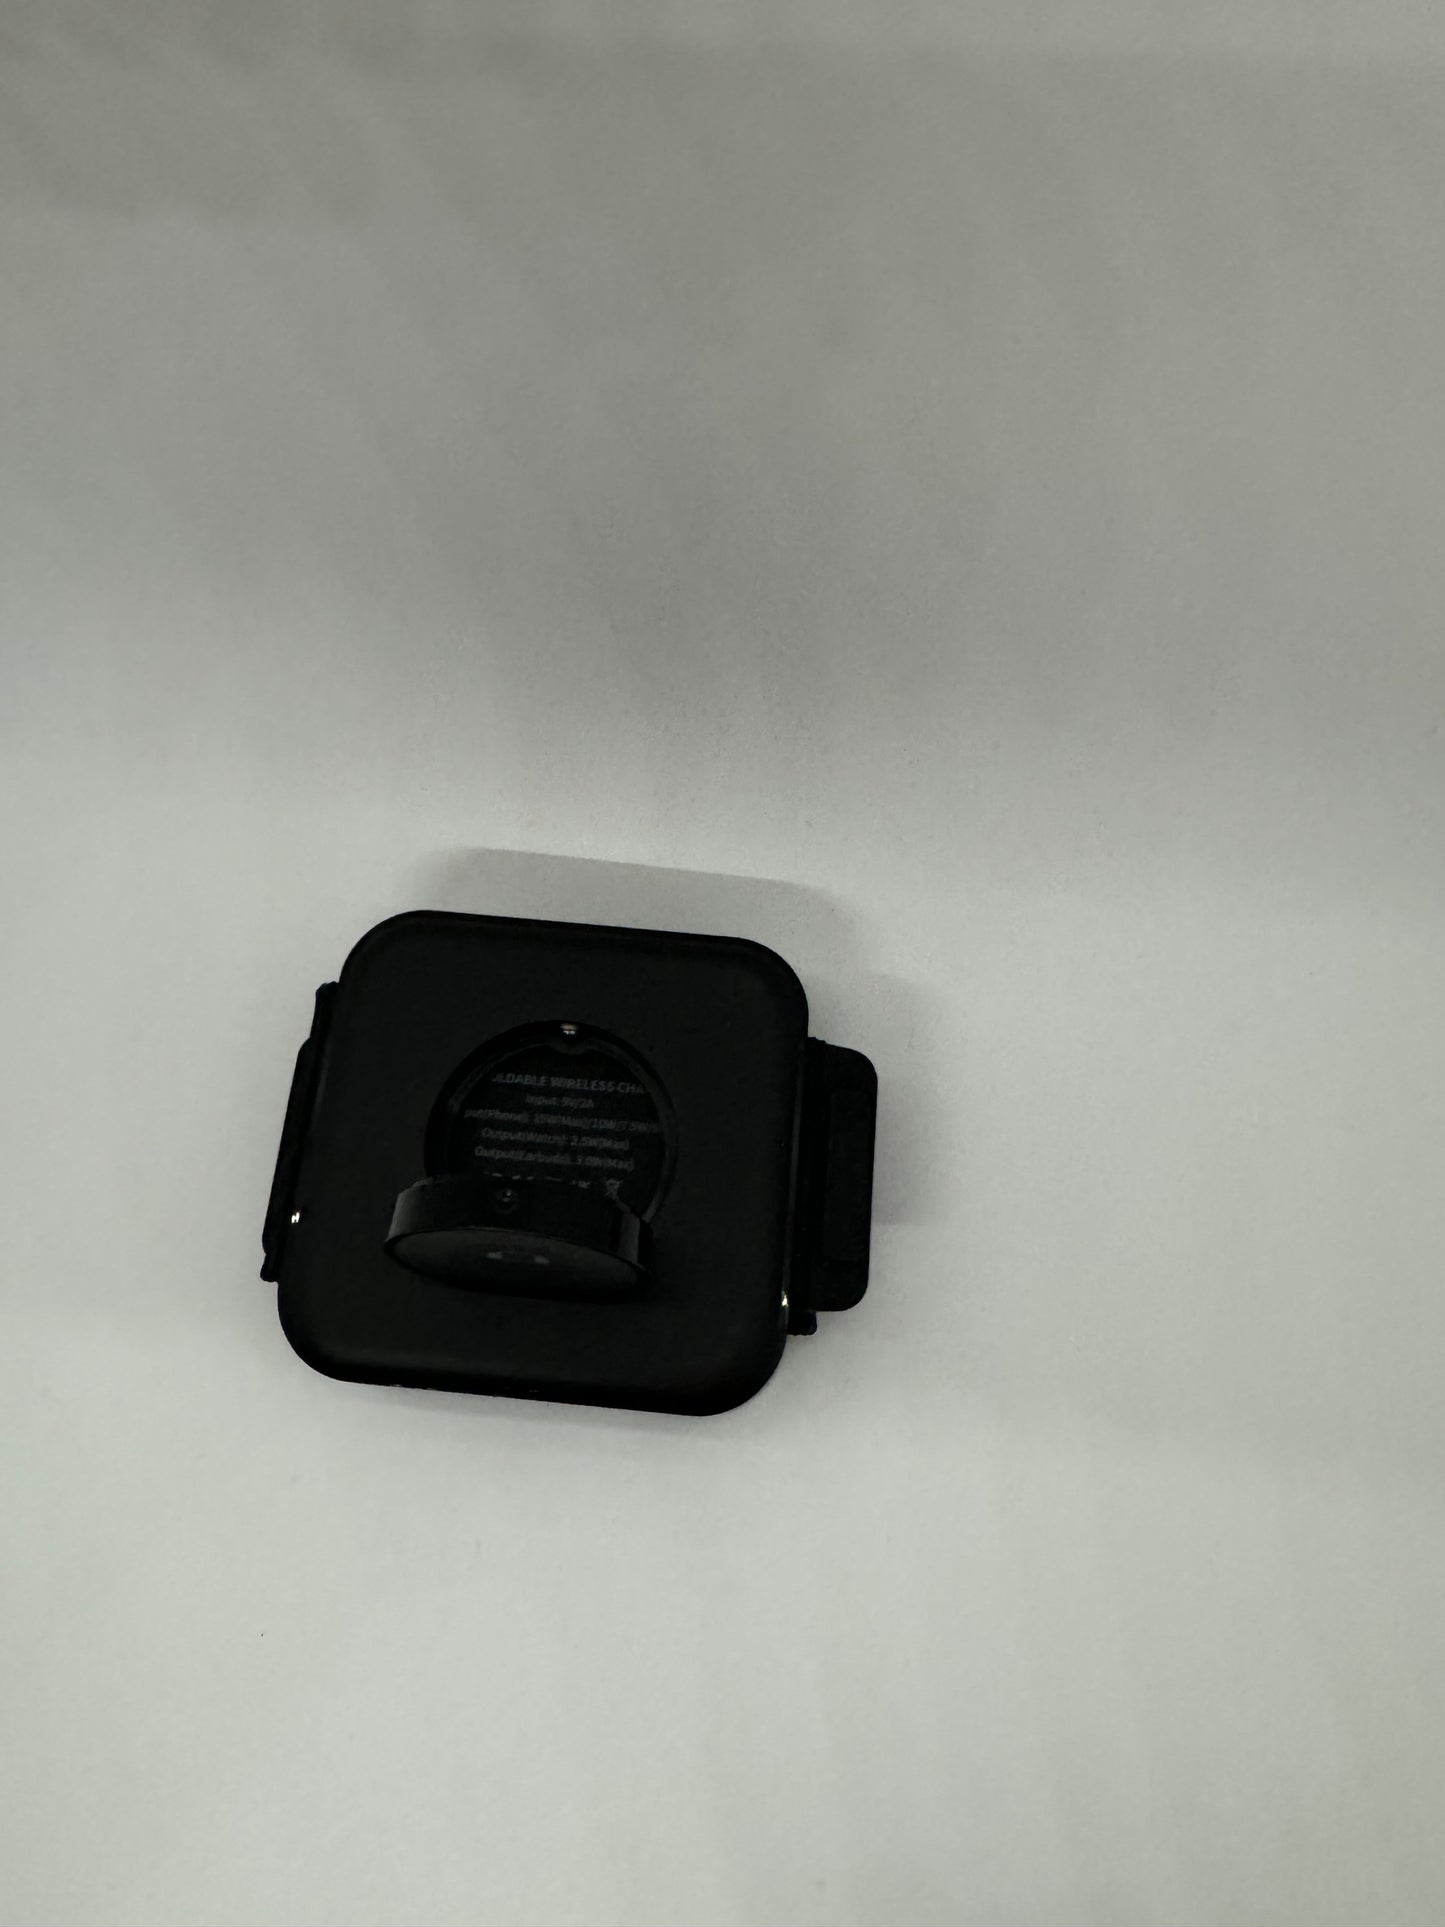 The picture shows a small black object on a white background. The object appears to be a square-shaped device with rounded corners. It has a clip on the back and some text written on it. The text reads: "SQUARE WIRELESS CHARGER, Model: MC-02A, Input: 5V-2A, Output: 5W". There is also a circular indentation in the center of the device, which seems to be the area where you would place a phone or other device for wireless ch